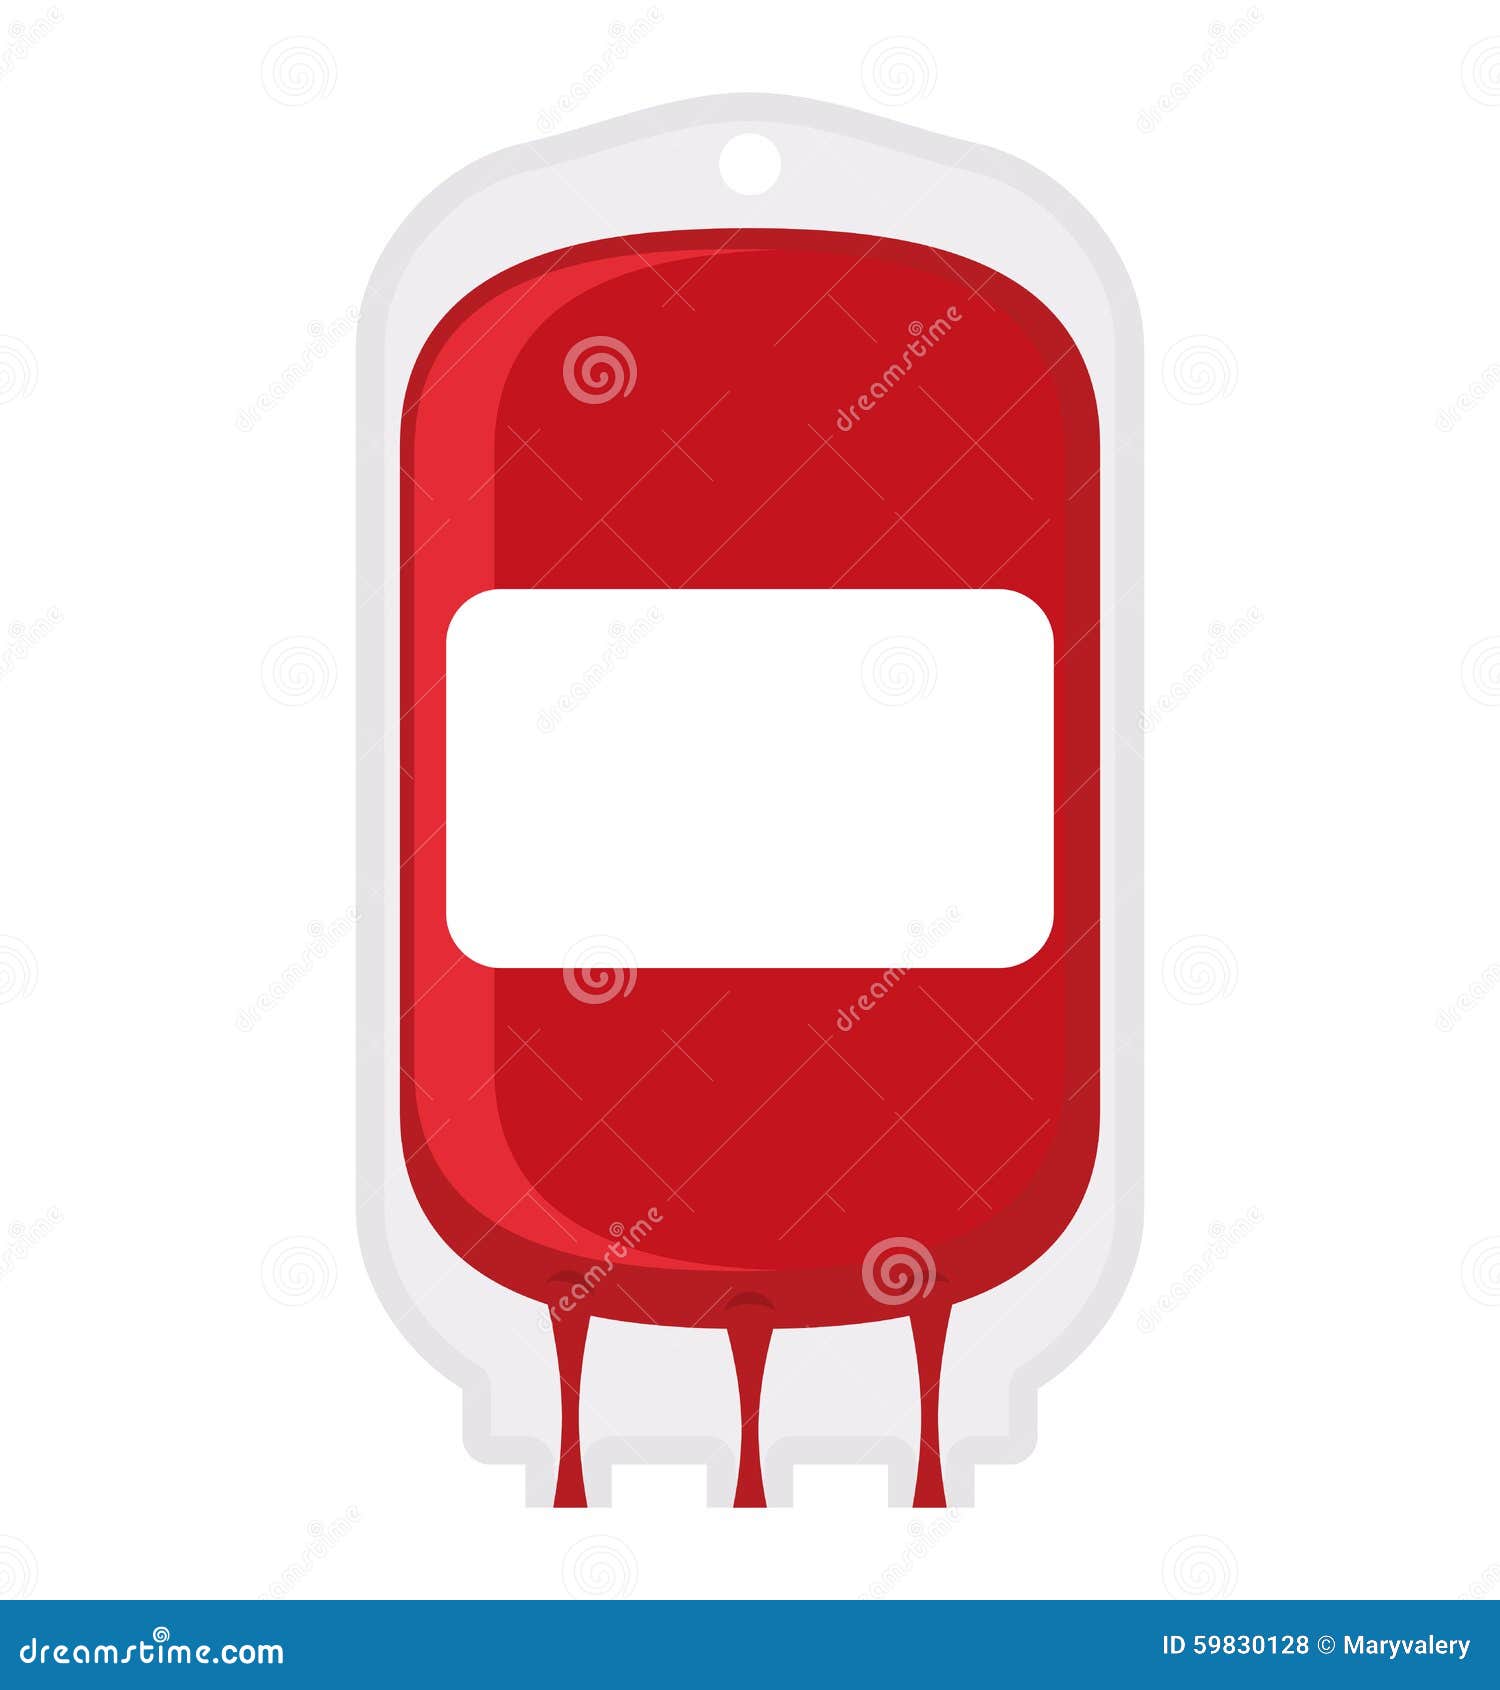 clip art images blood transfusion - photo #9